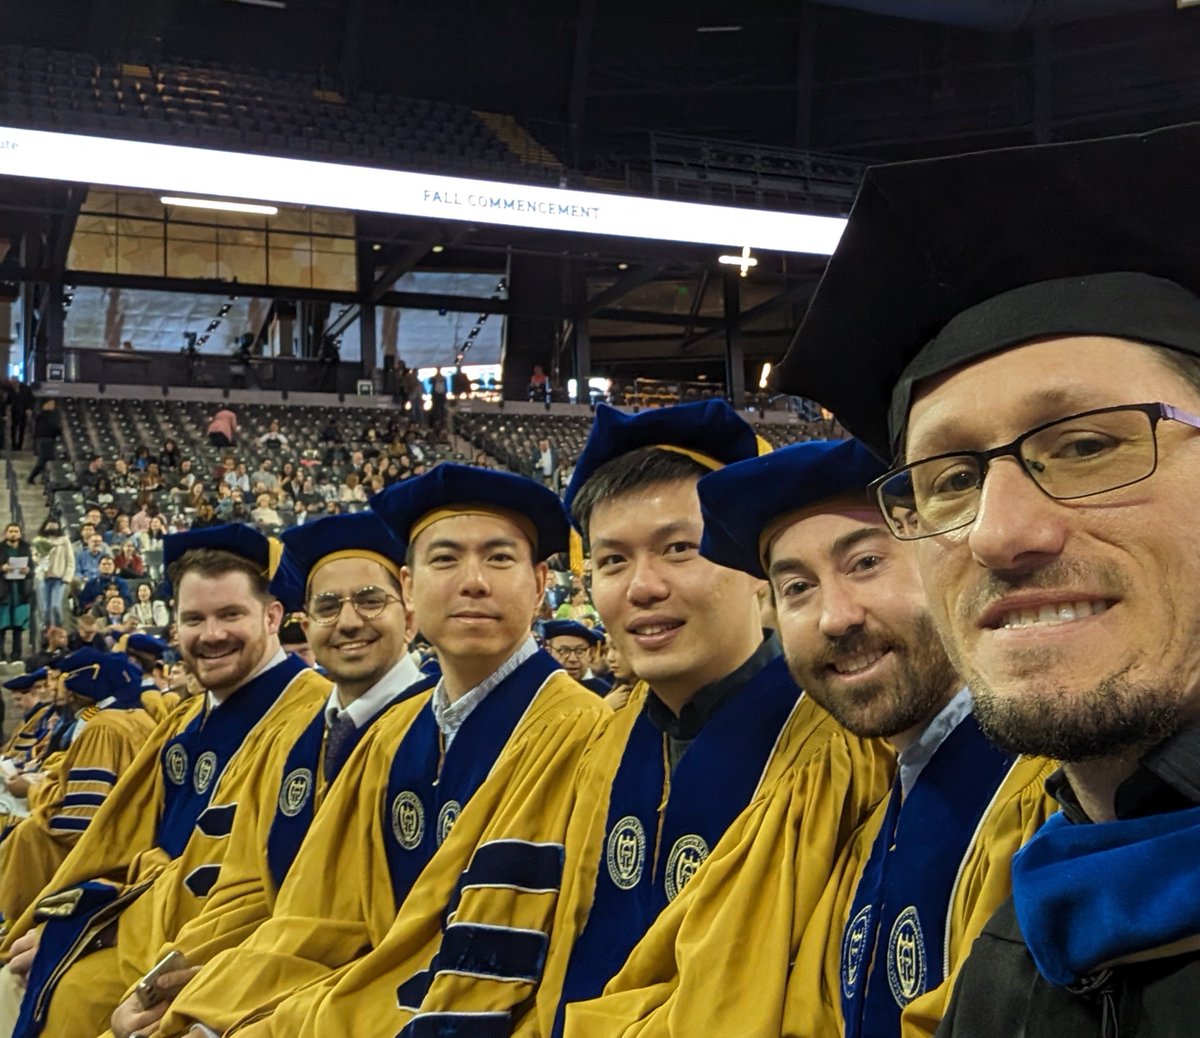 Quite a holiday season: I graduated five students from the RIPL lab last week! Extremely proud of all of them: @mzubairirshad, @jamessealesmith, Chia-Wen Kuo, Nathan Glaser, and Yen-Cheng Liu. #proudadvisor

Congratulations to all graduates!